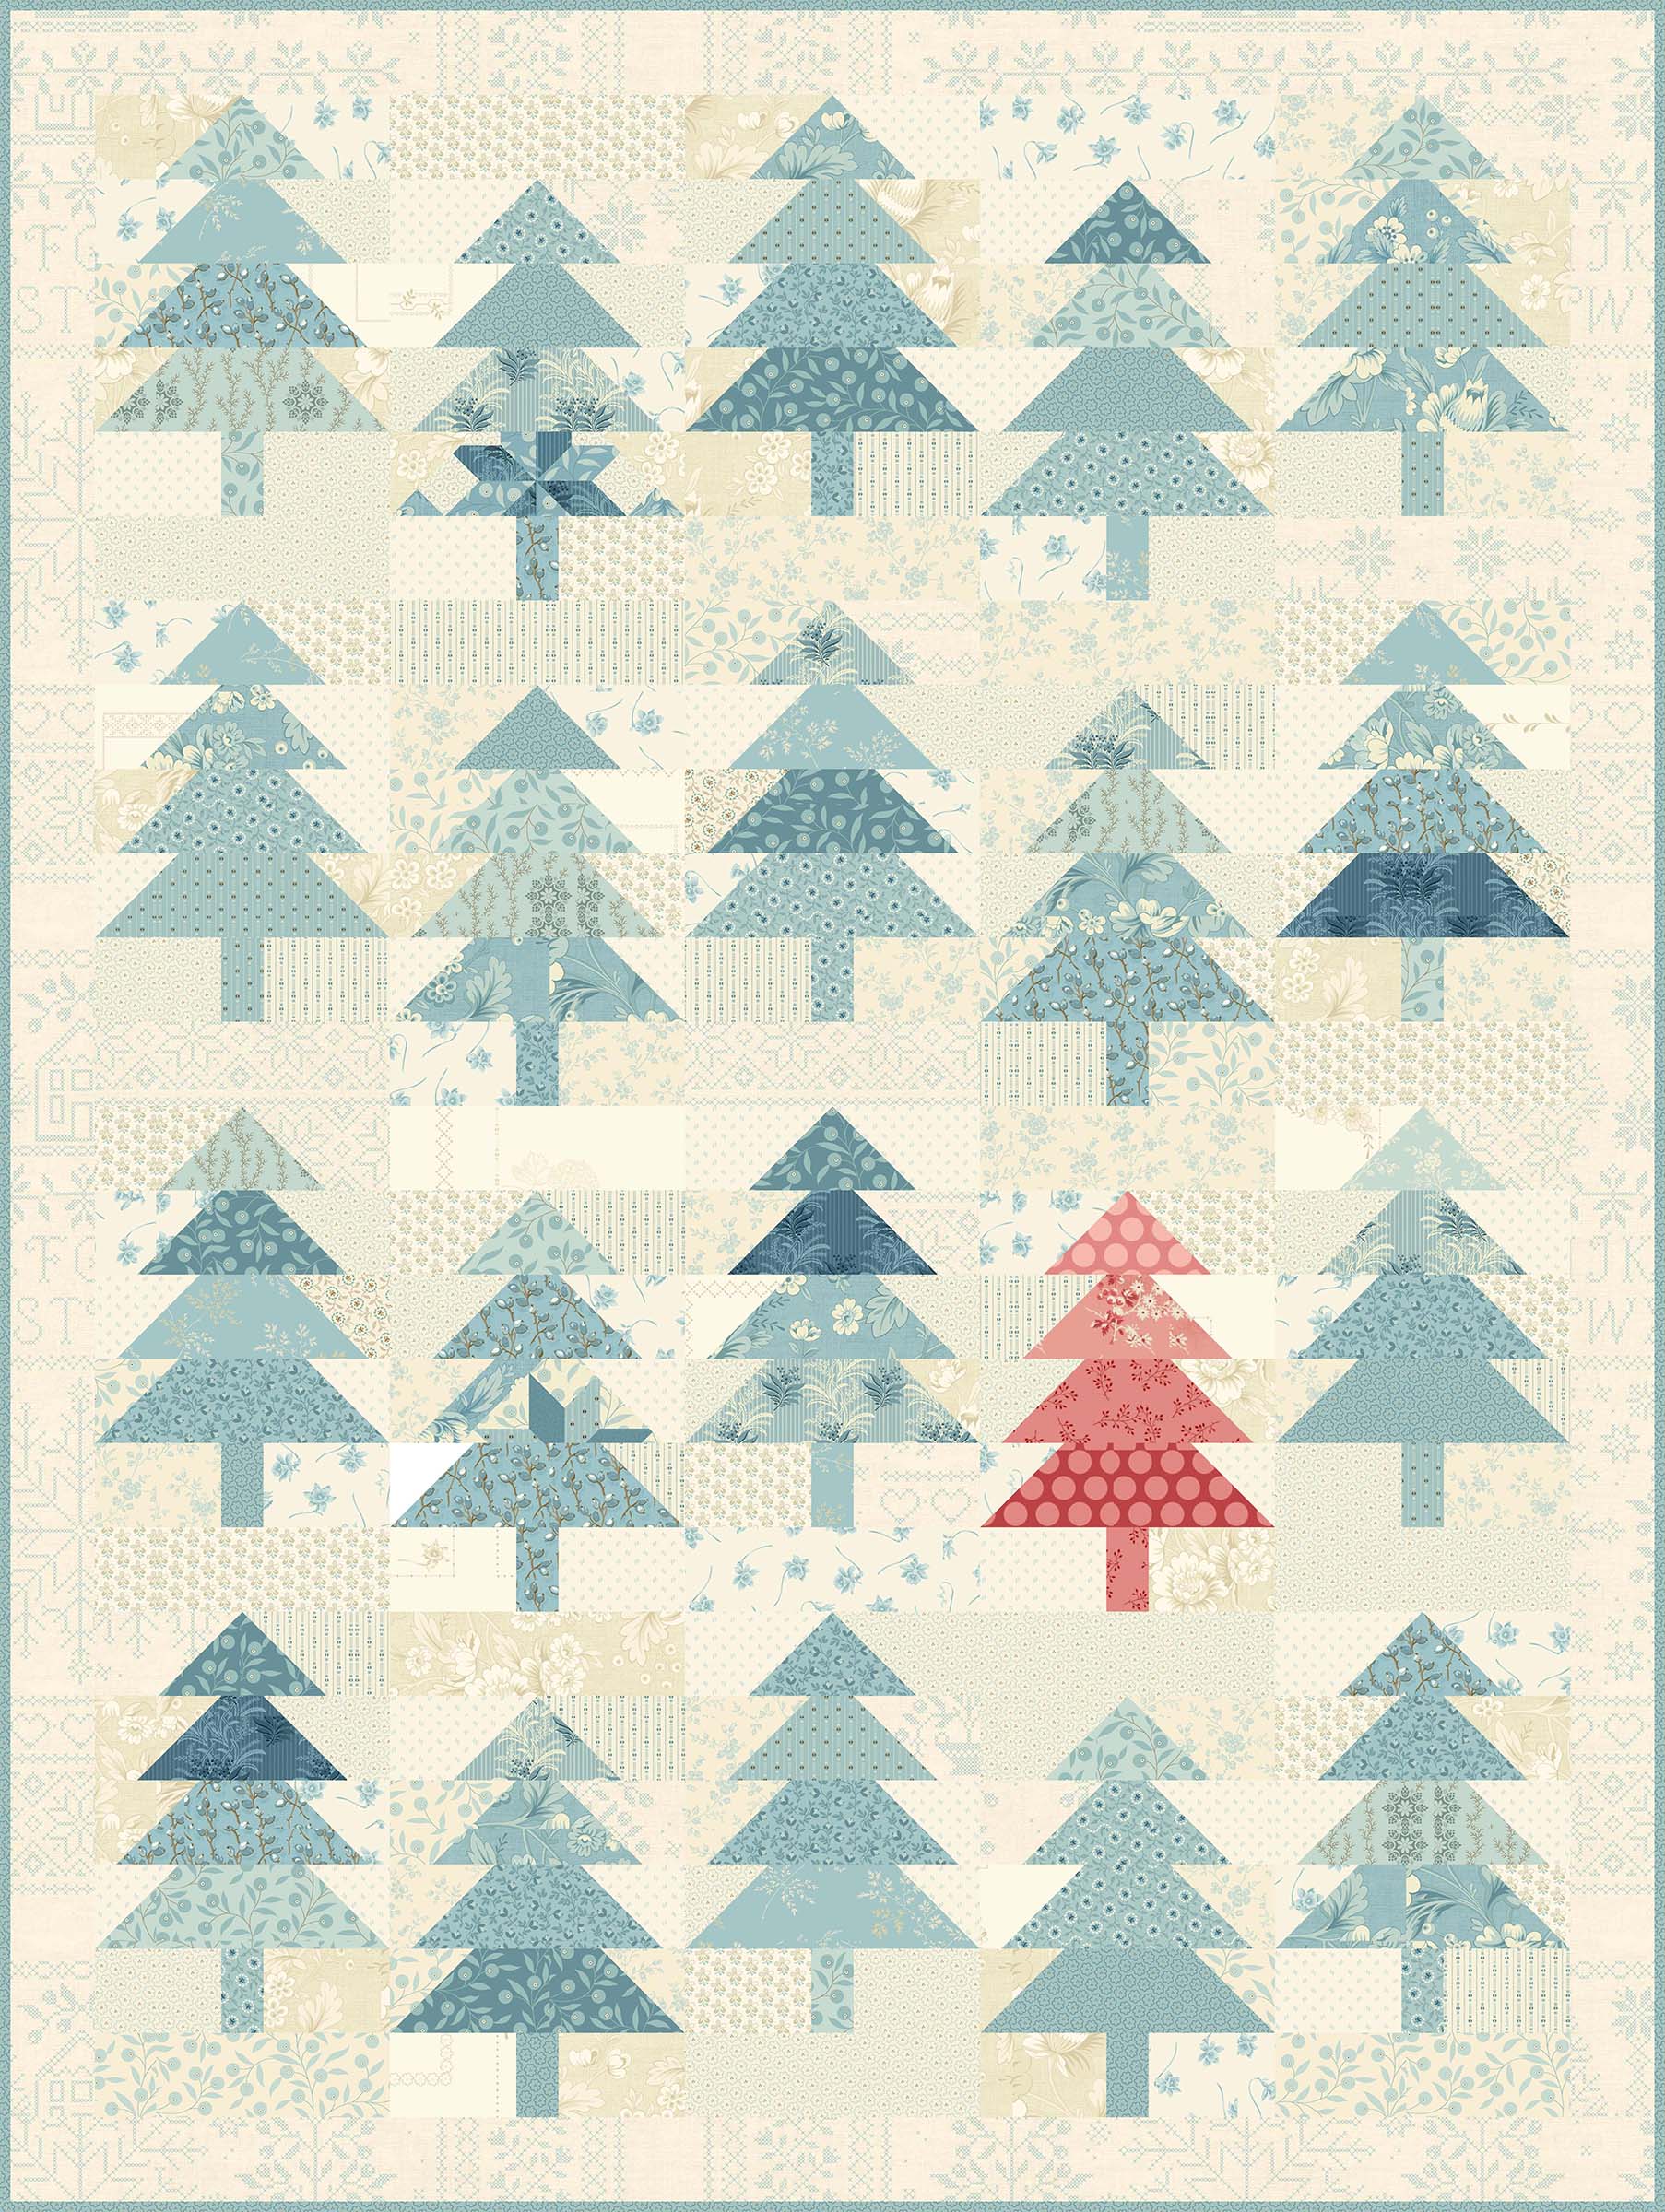 A mockup of the Holiday Forest Quilt Pattern in another colorway using the Bluebird collection